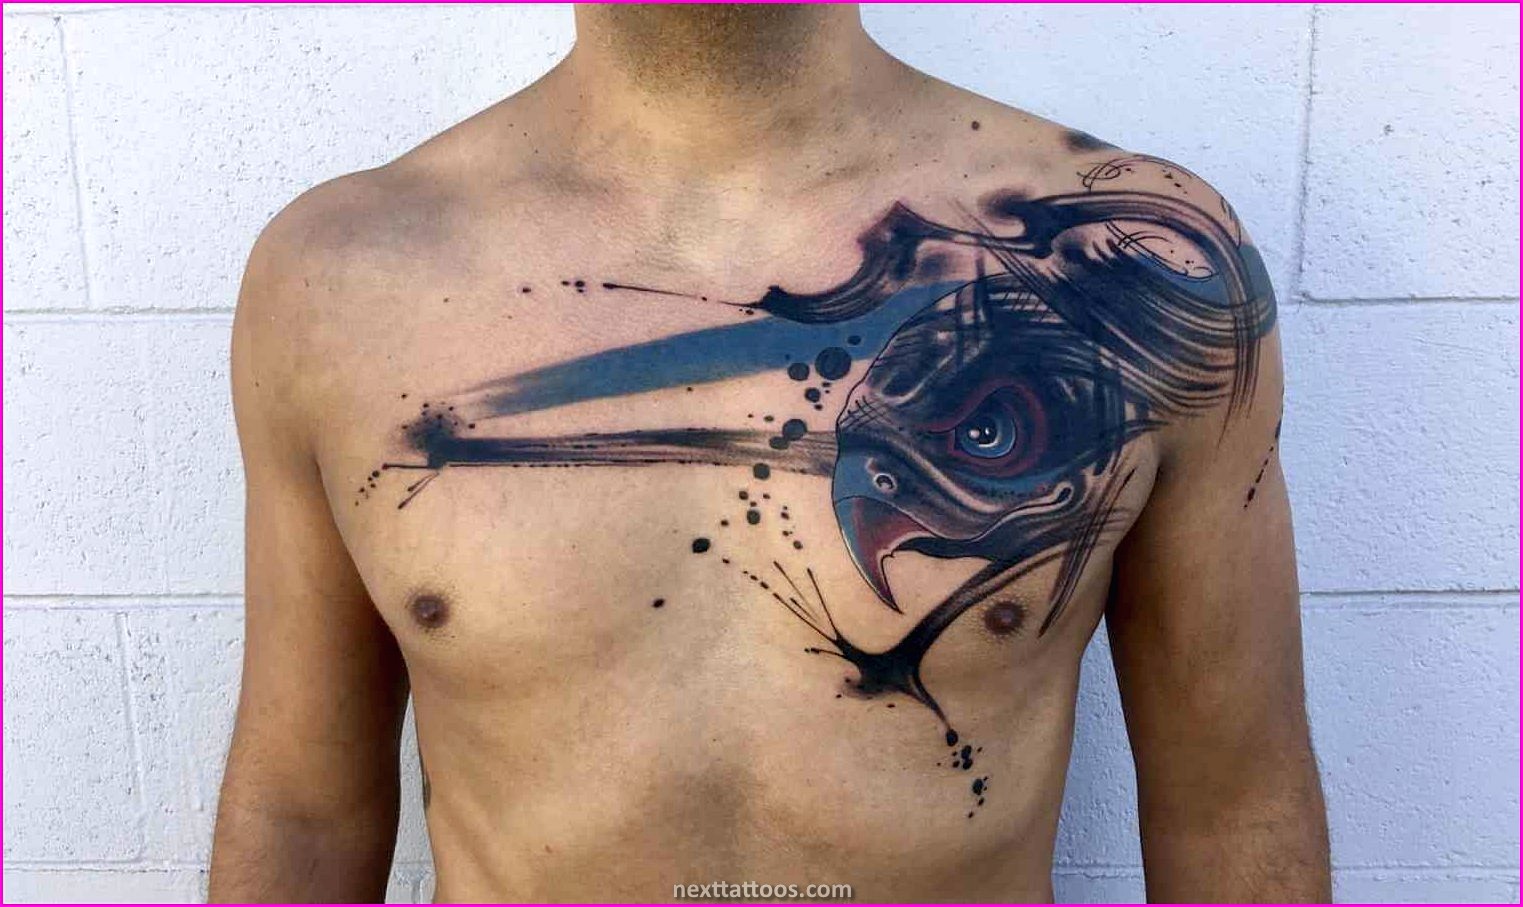 Top 100 Male Tattoos - Getting a Tattoo That Says Something That Means Something to You